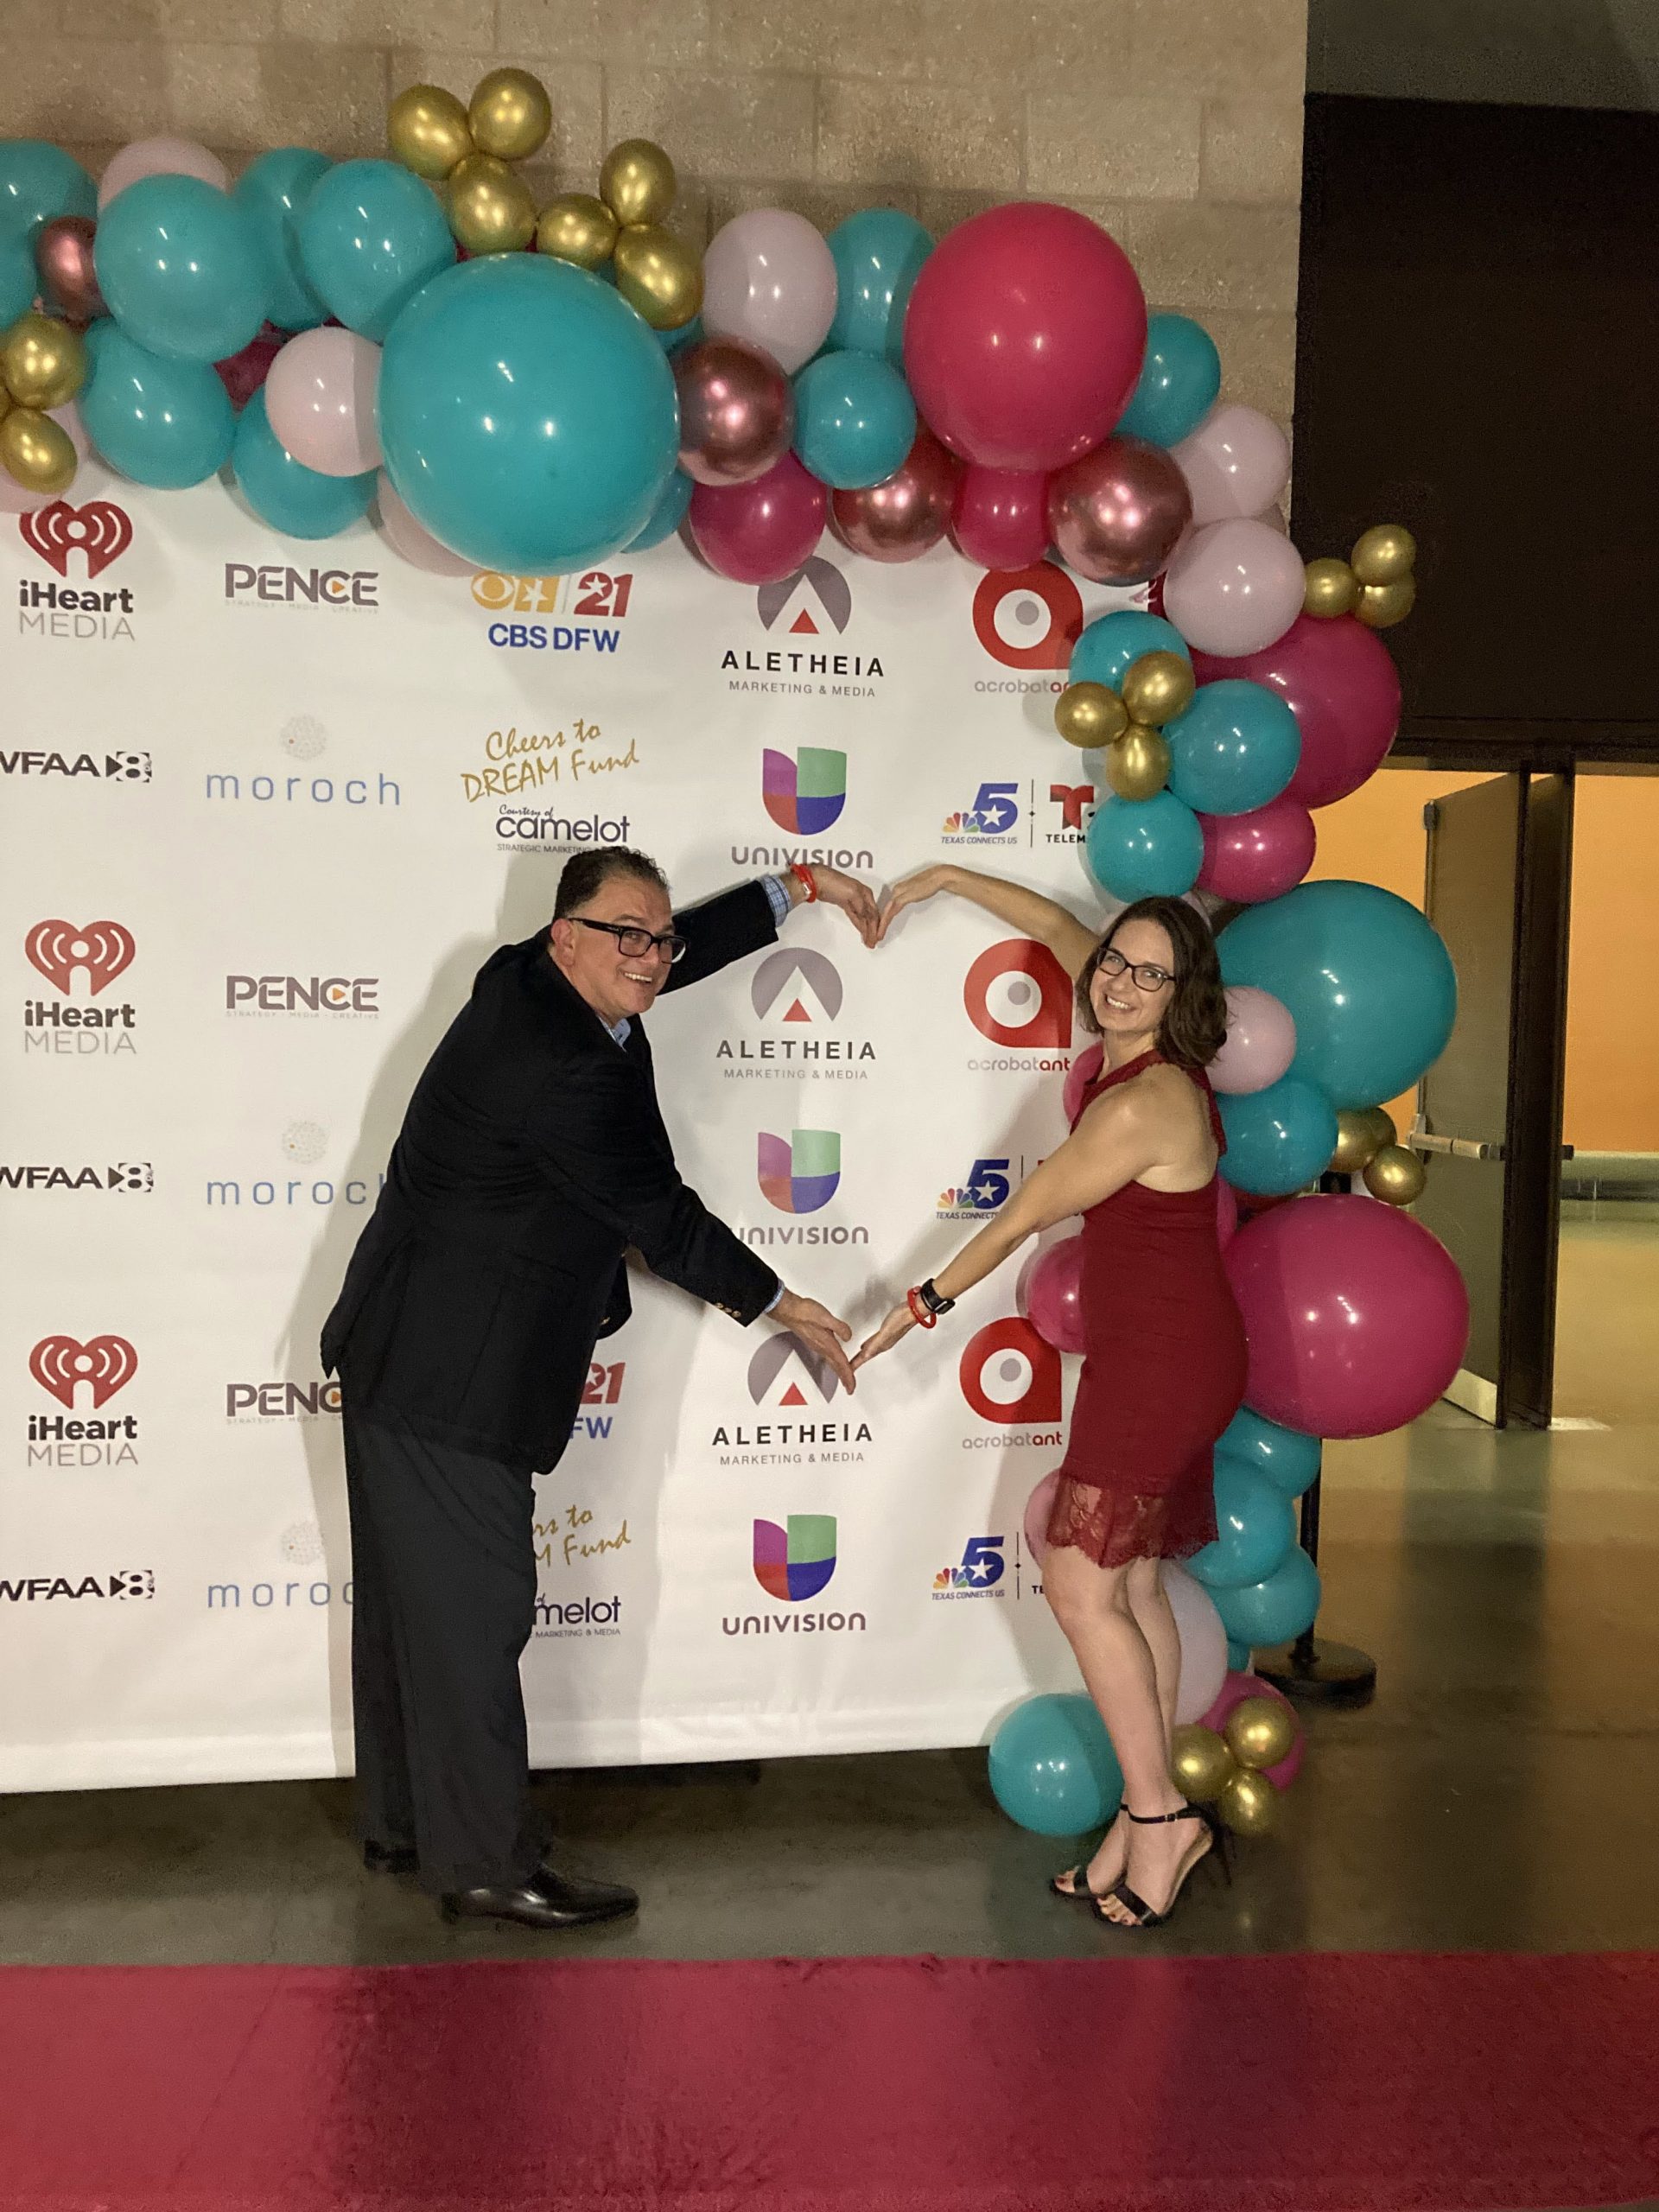 Two people holding arms together in the shape of a heart with balloons in foreground.